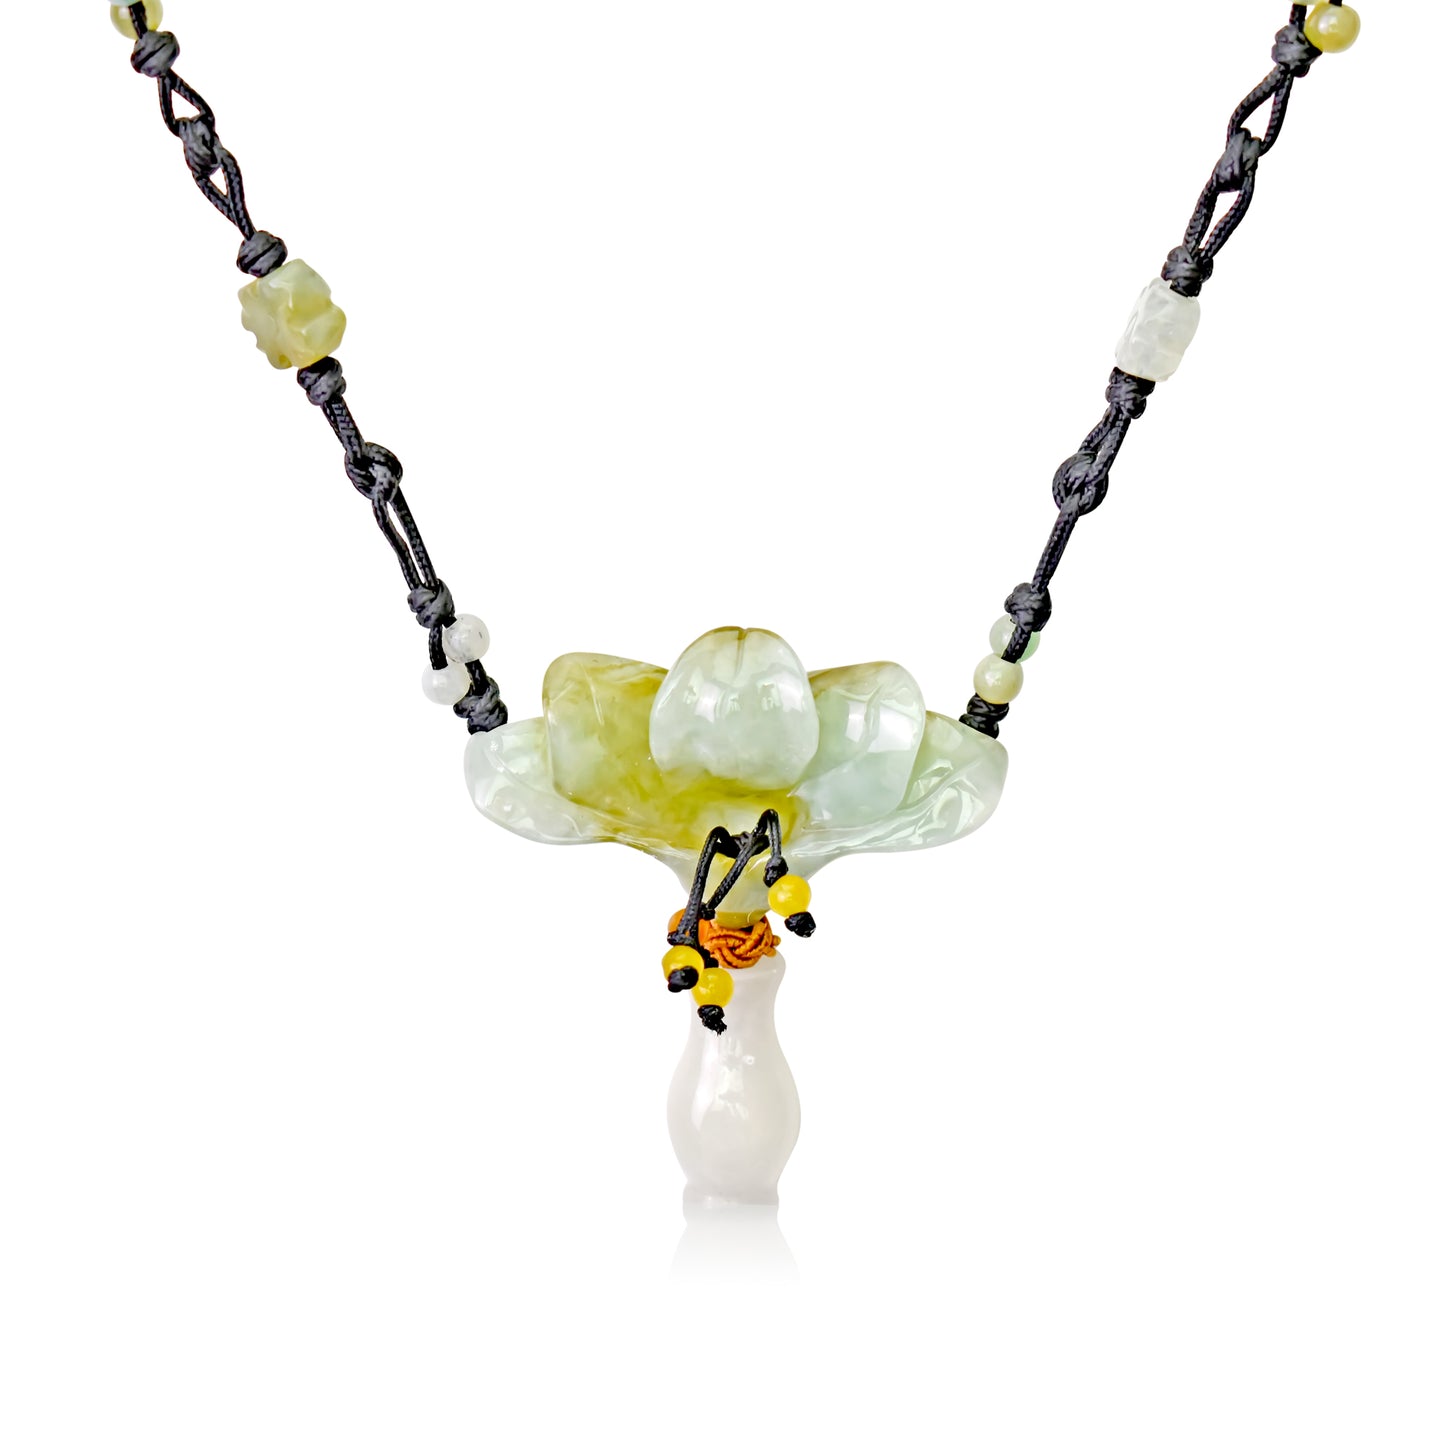 Make Your Wishes Come True with the Peacock Flower Jade Necklace made with Black Cord